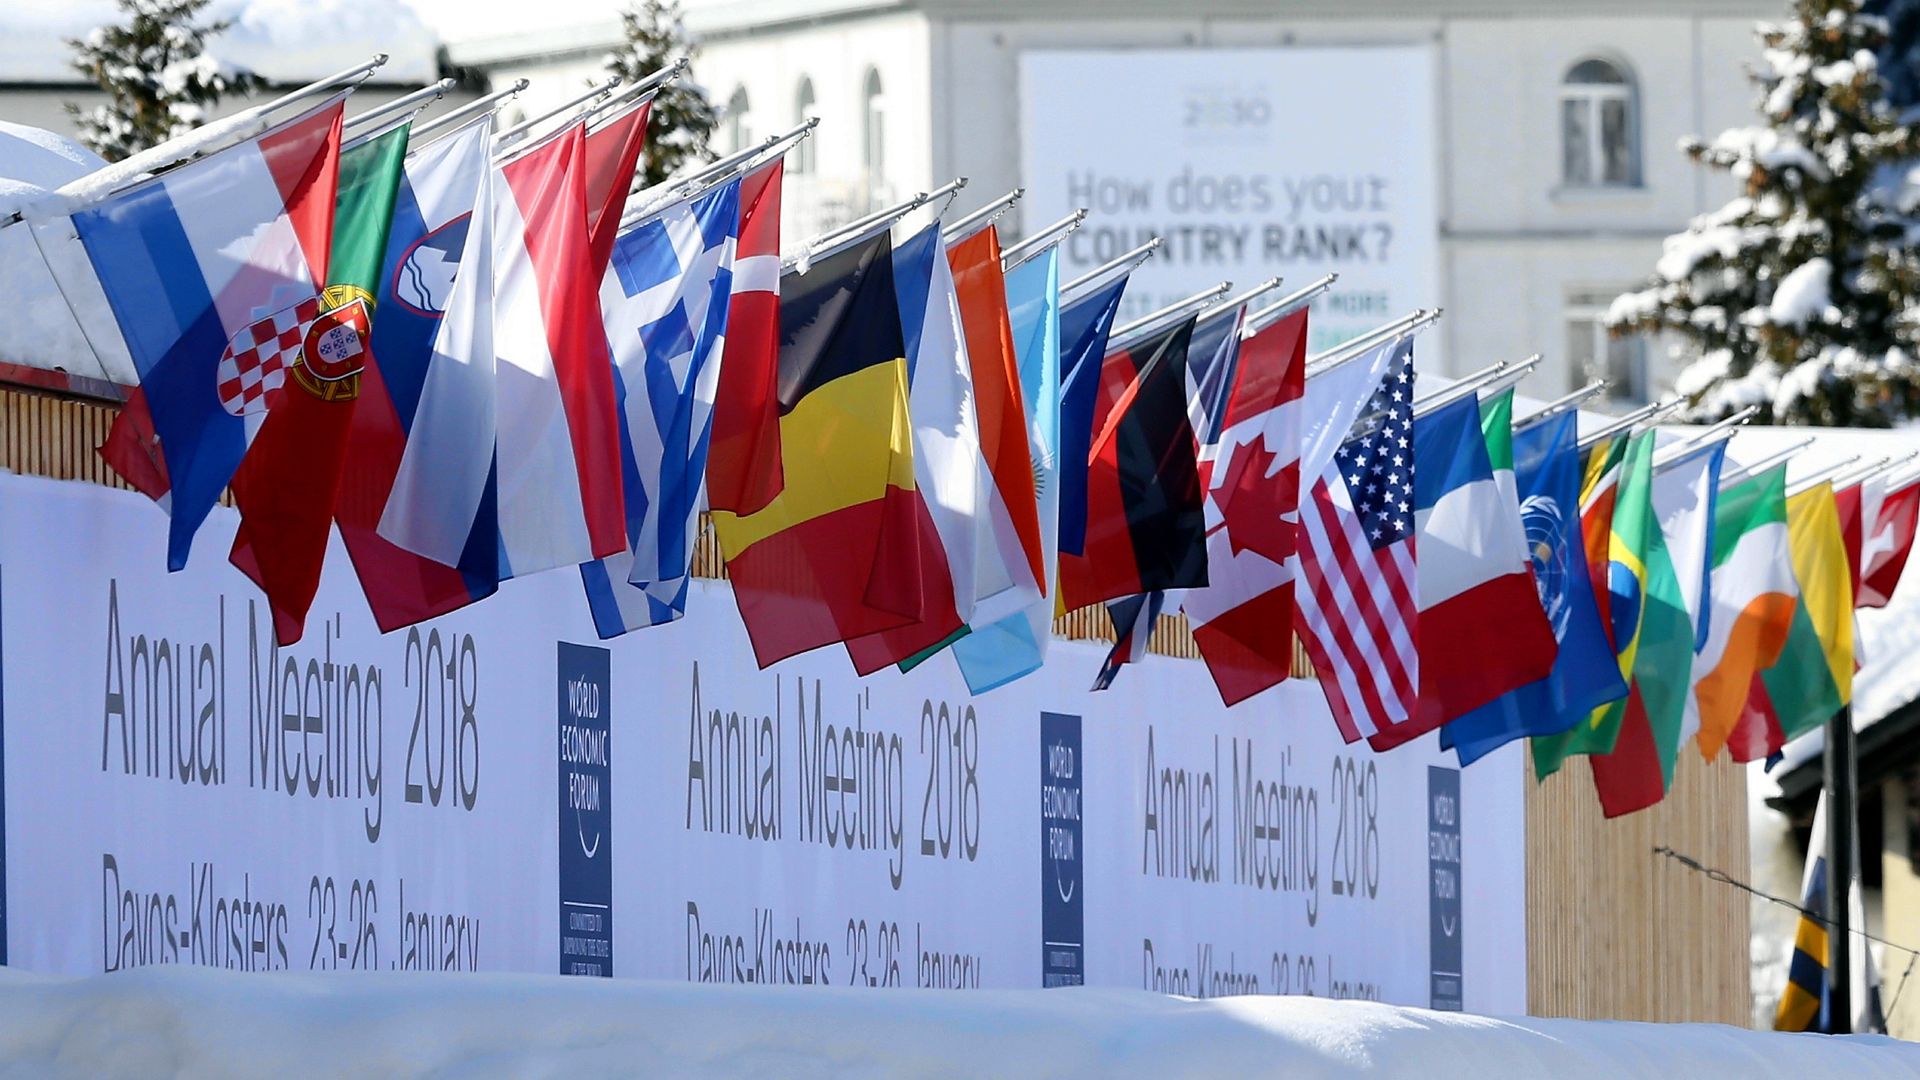 Line of flags for countries attending the 2018 World Economic Forum in Davos, Switzerland